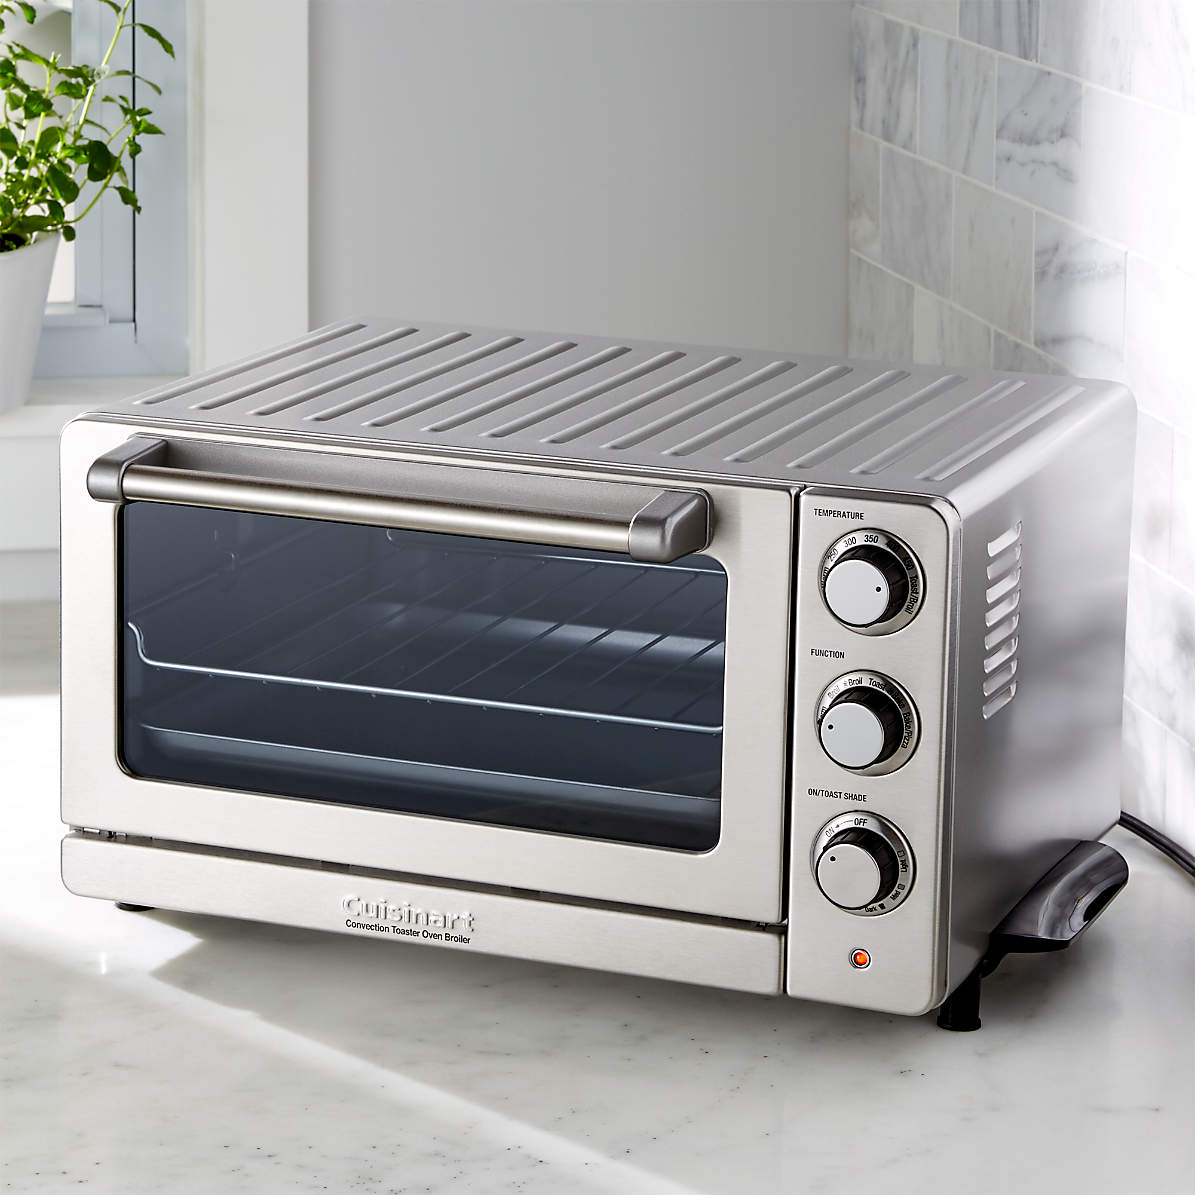 Cuisinart Stainless Steel Convection Toaster Oven + Reviews | Crate & Barrel